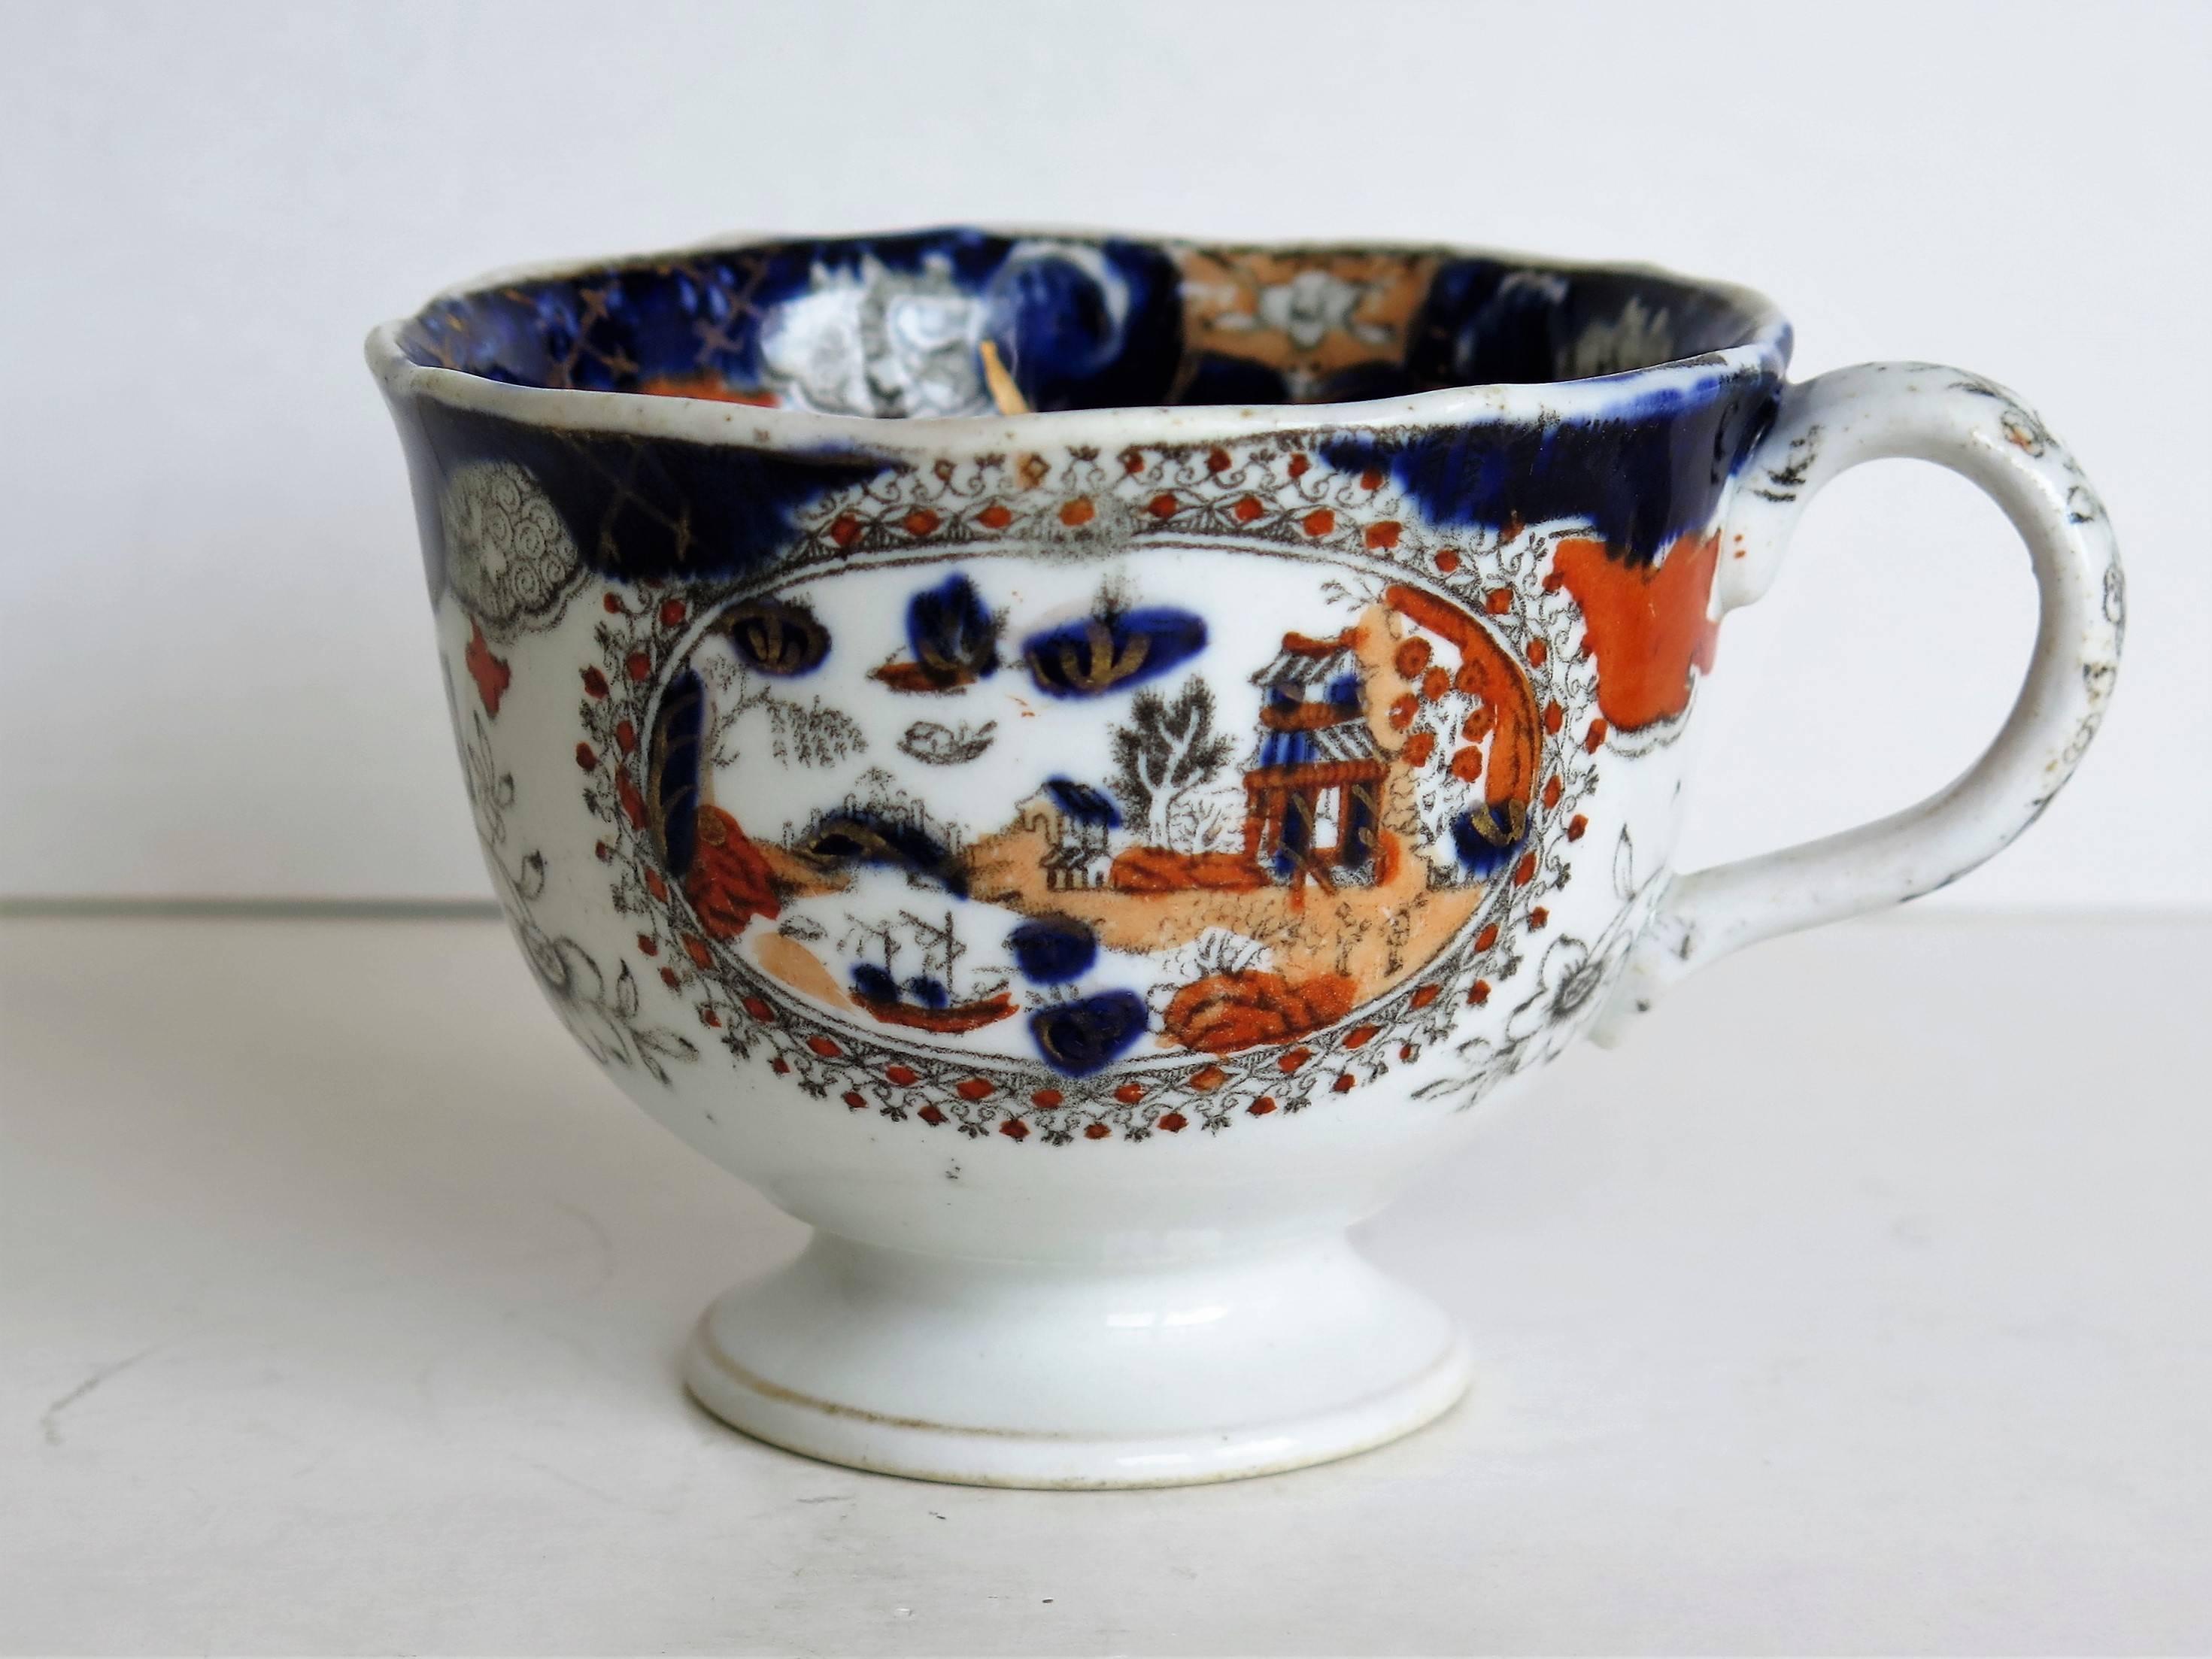 This is a footed ironstone pottery coffee cup made by Mason's of Lane Delph, Staffordshire, England, during the early part of the 19th century.

Individual coffee cups by Mason's are hard to find.

The chinoiserie pattern is number 303, called